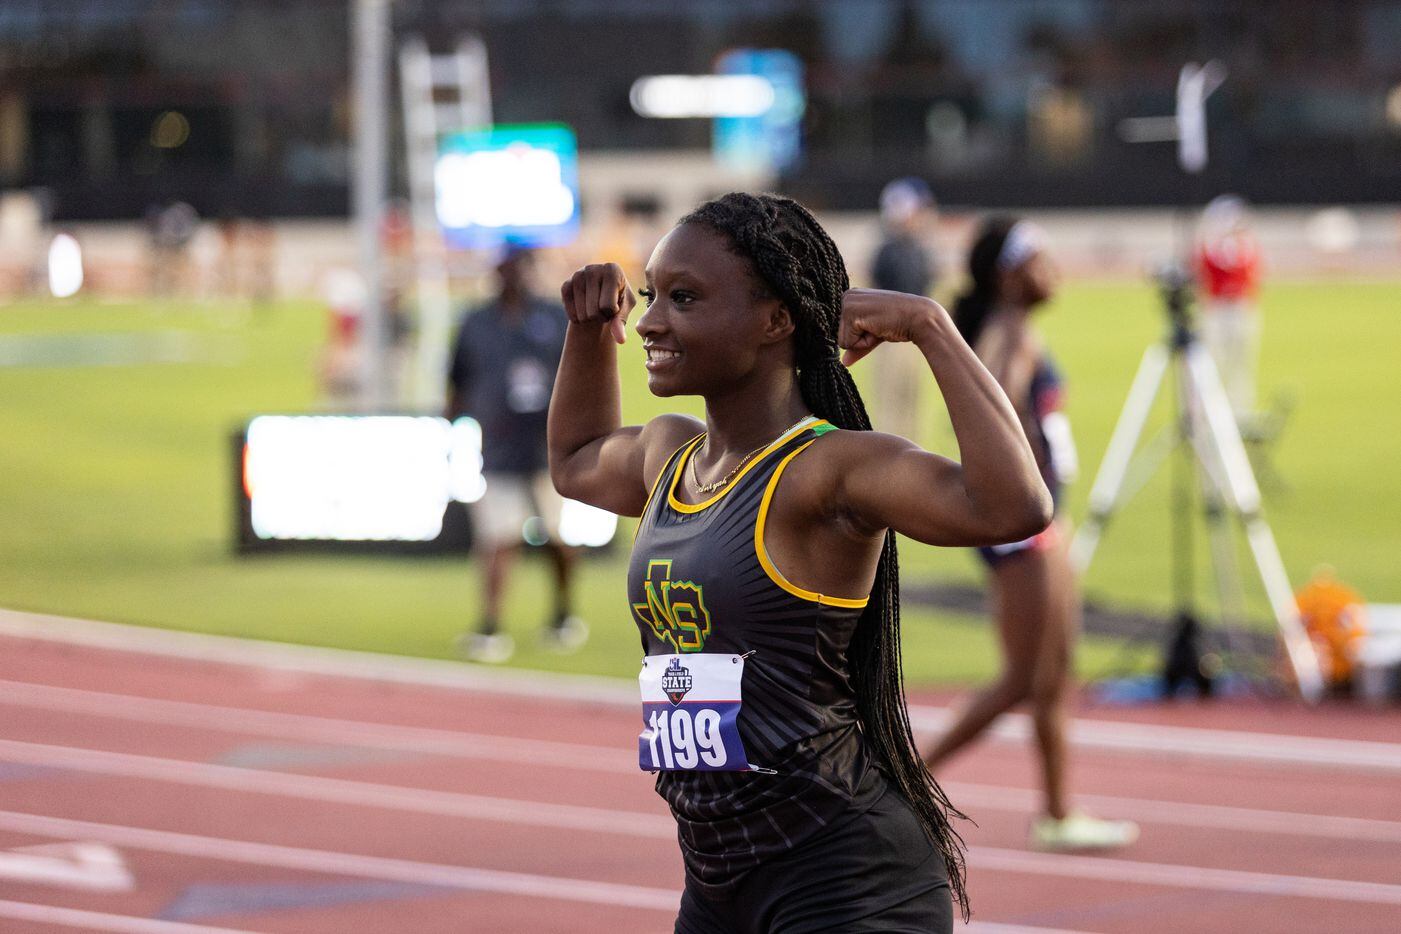 Aniyah Bigam of Carrollton Smith poses with arms flexed after the girls’ 200m dash at the...